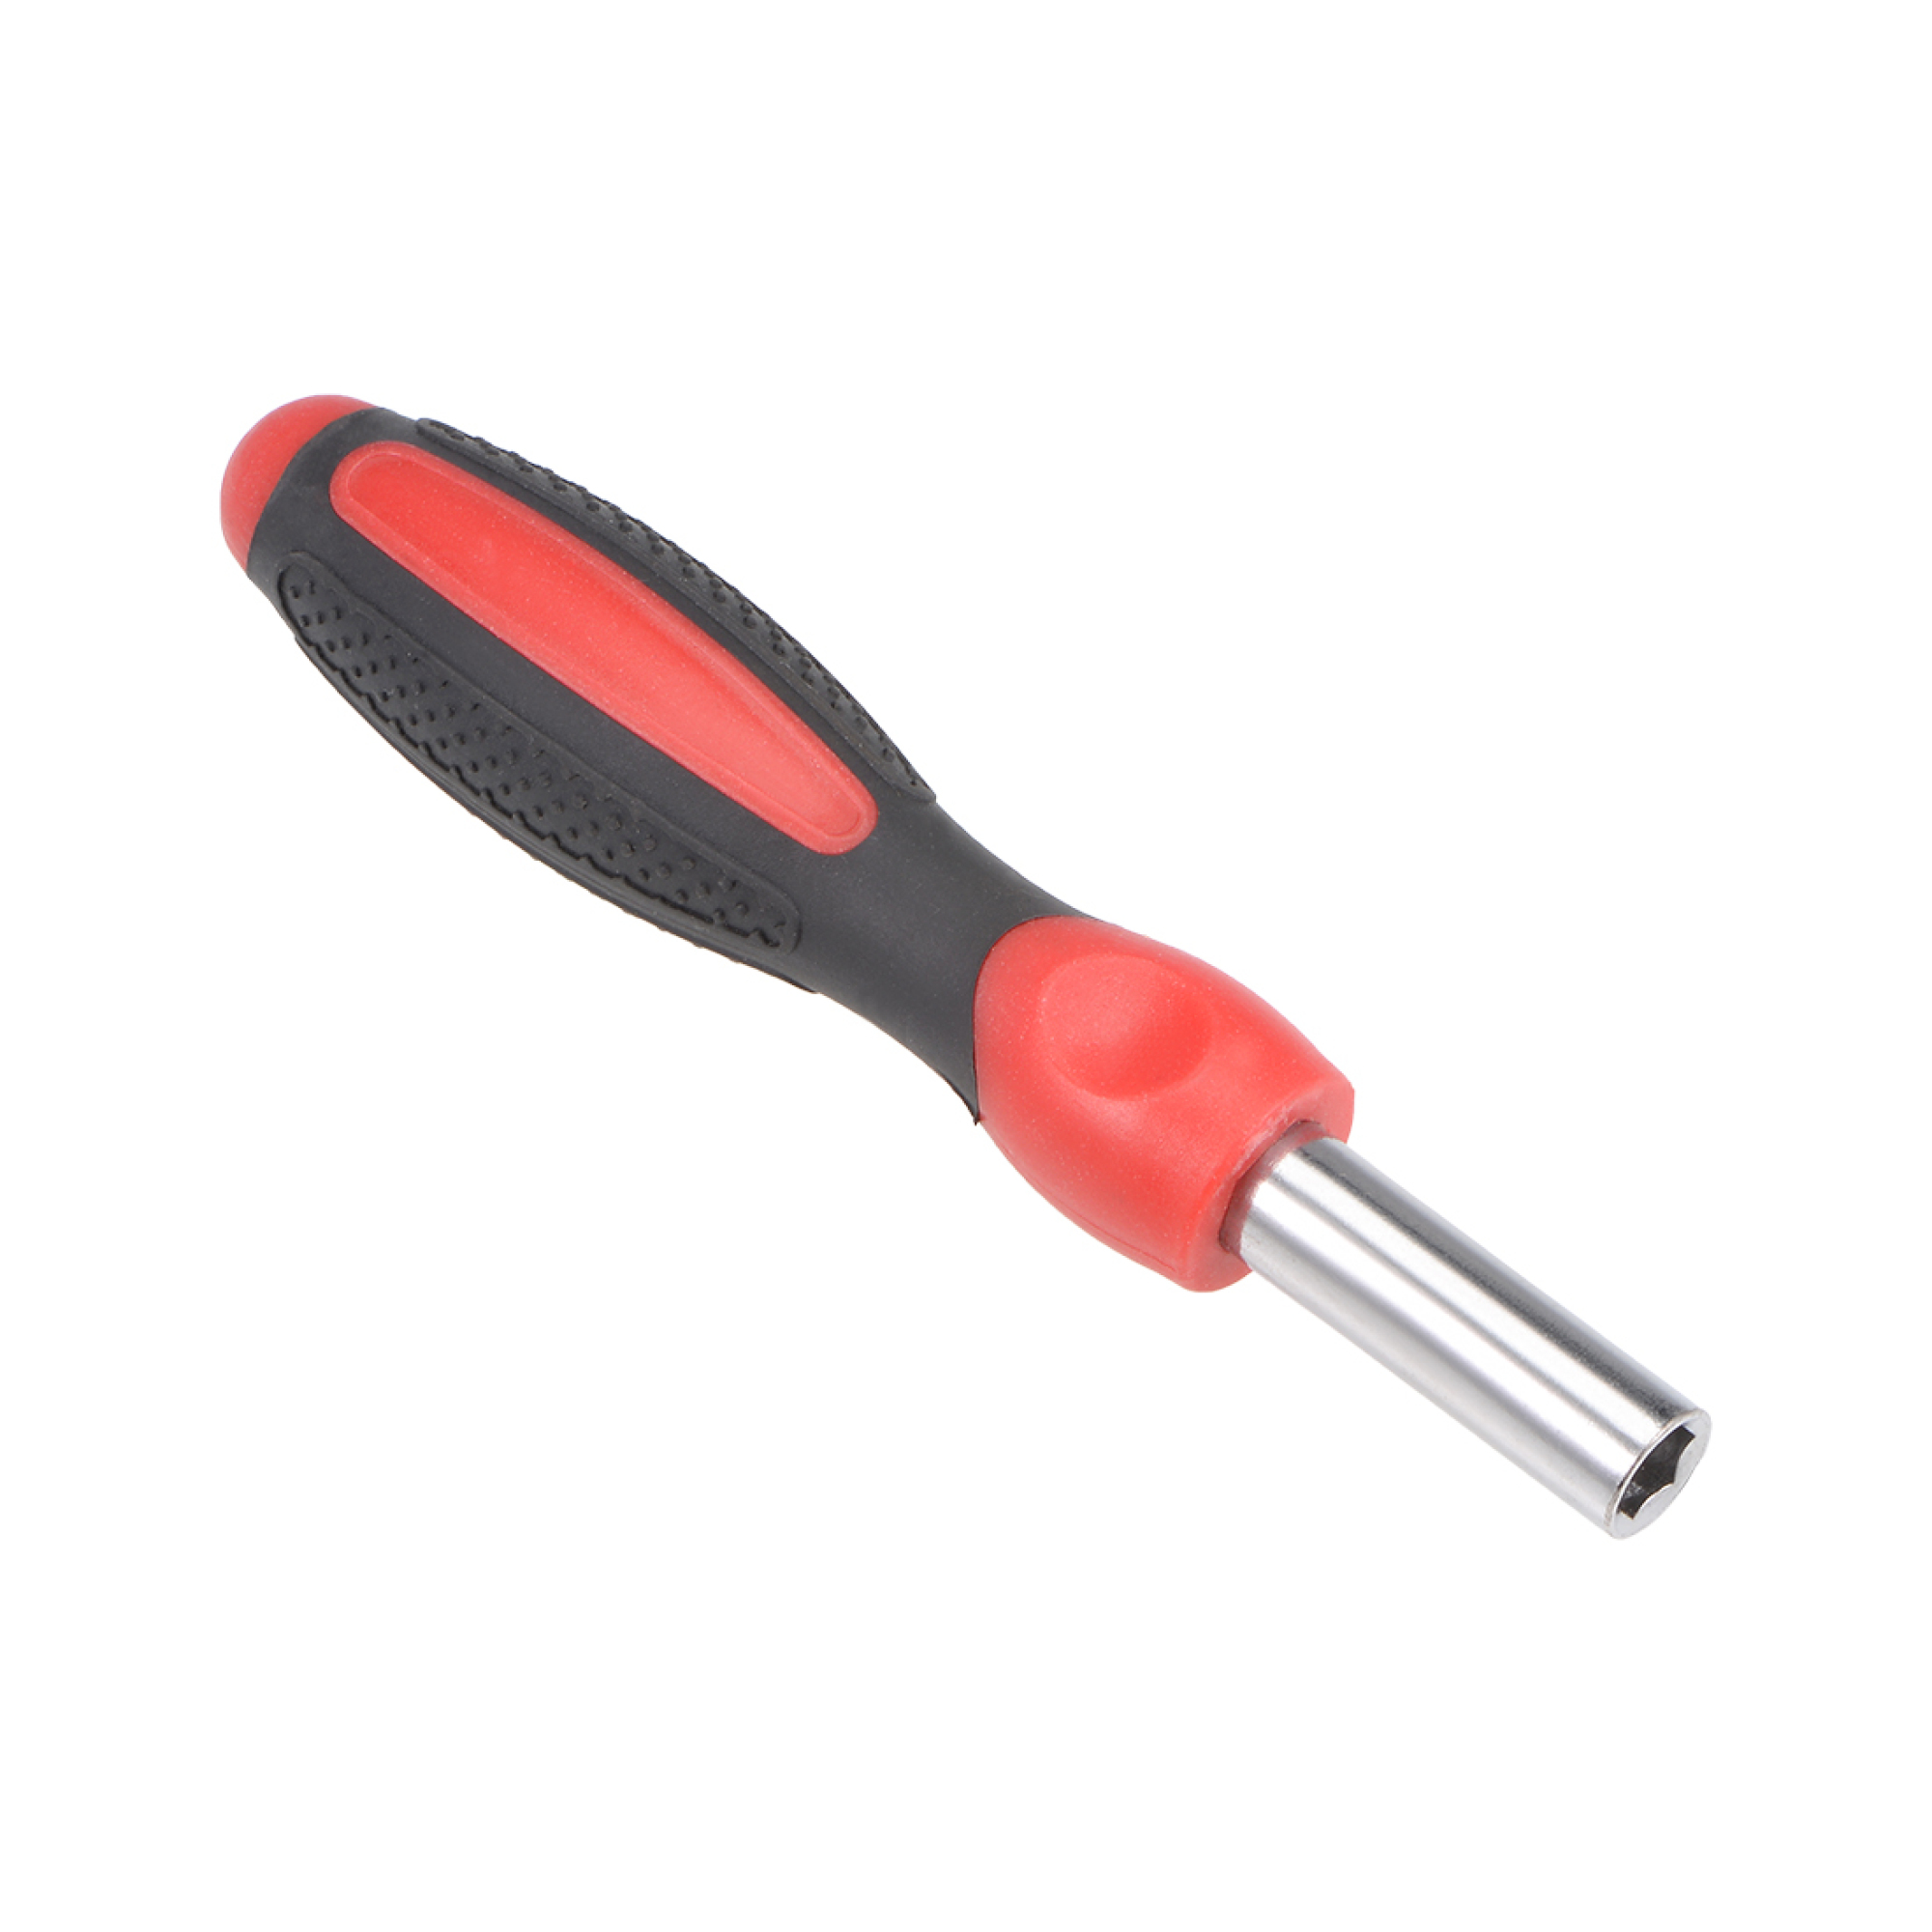 1/4" Hex Shank Screwdriver Non-Slip Wrench Handle 4.8" Long